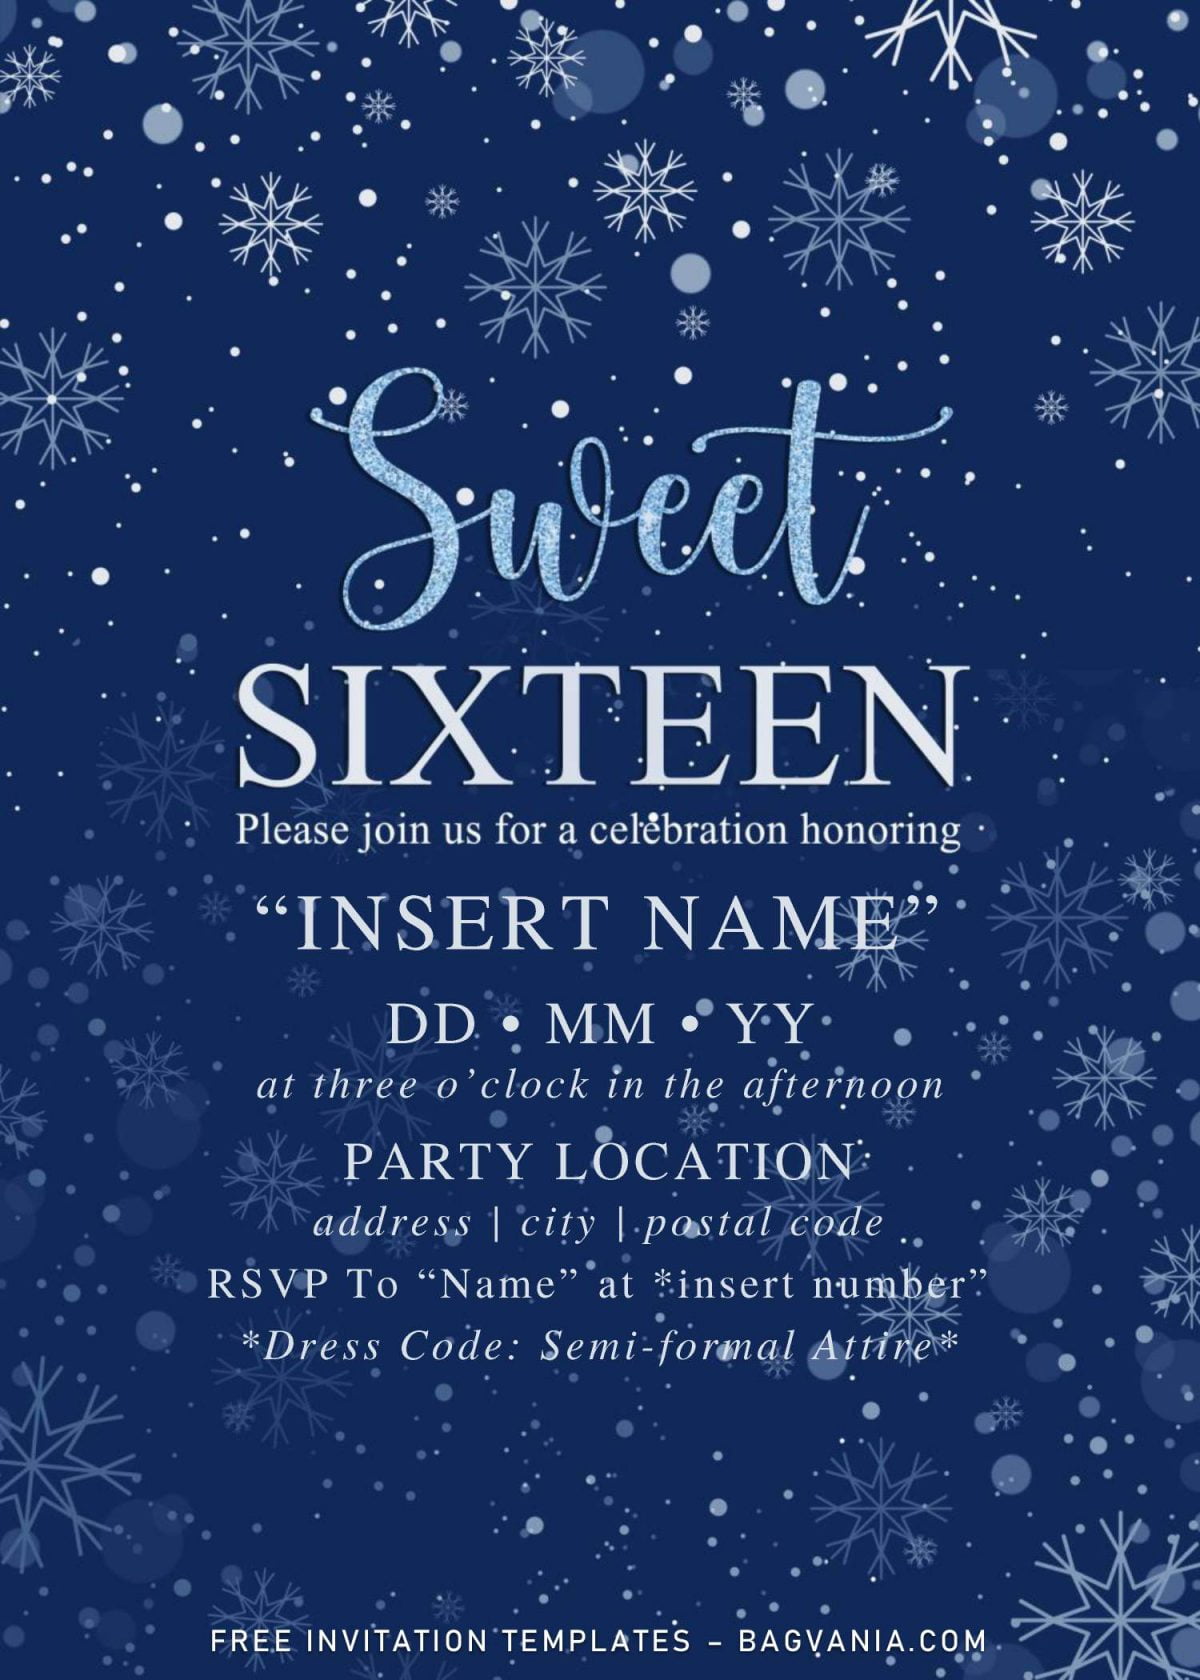 Free Winter Sweet Sixteen Birthday Invitation Templates For Word and has blue background